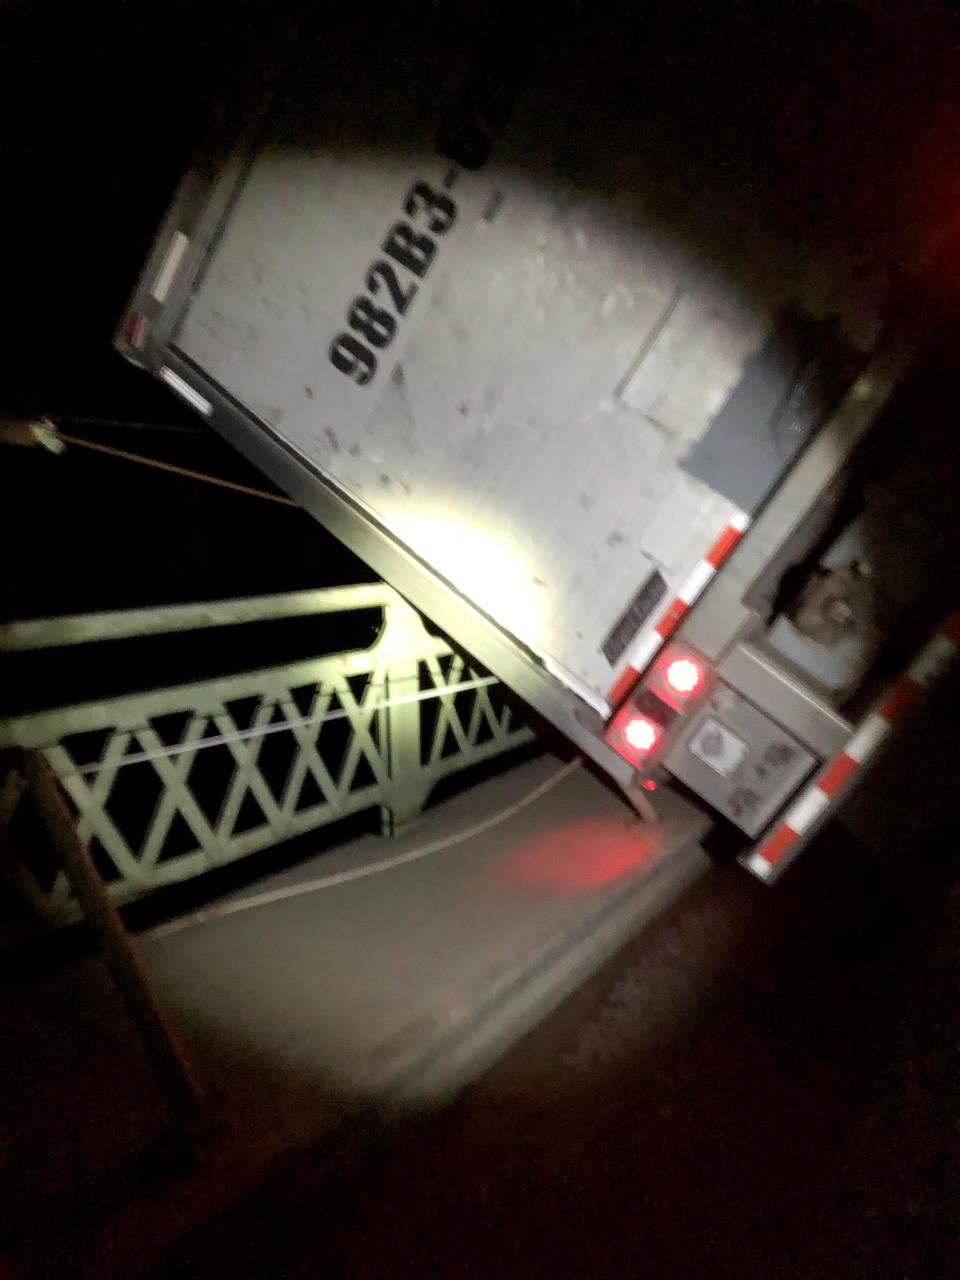 In this Wednesday, Jan. 13, 2021, photo provided by the Washington State Department of Transportation, a tractor-trailer leans against bridge railing where it blew over amid heavy wind gusts as it attempted to travel over the Deception Pass Bridge north of Seattle. Part of the truck was left dangling over the edge of the bridge, but the driver escaped unharmed. (Washington State Department of Transportation via AP)